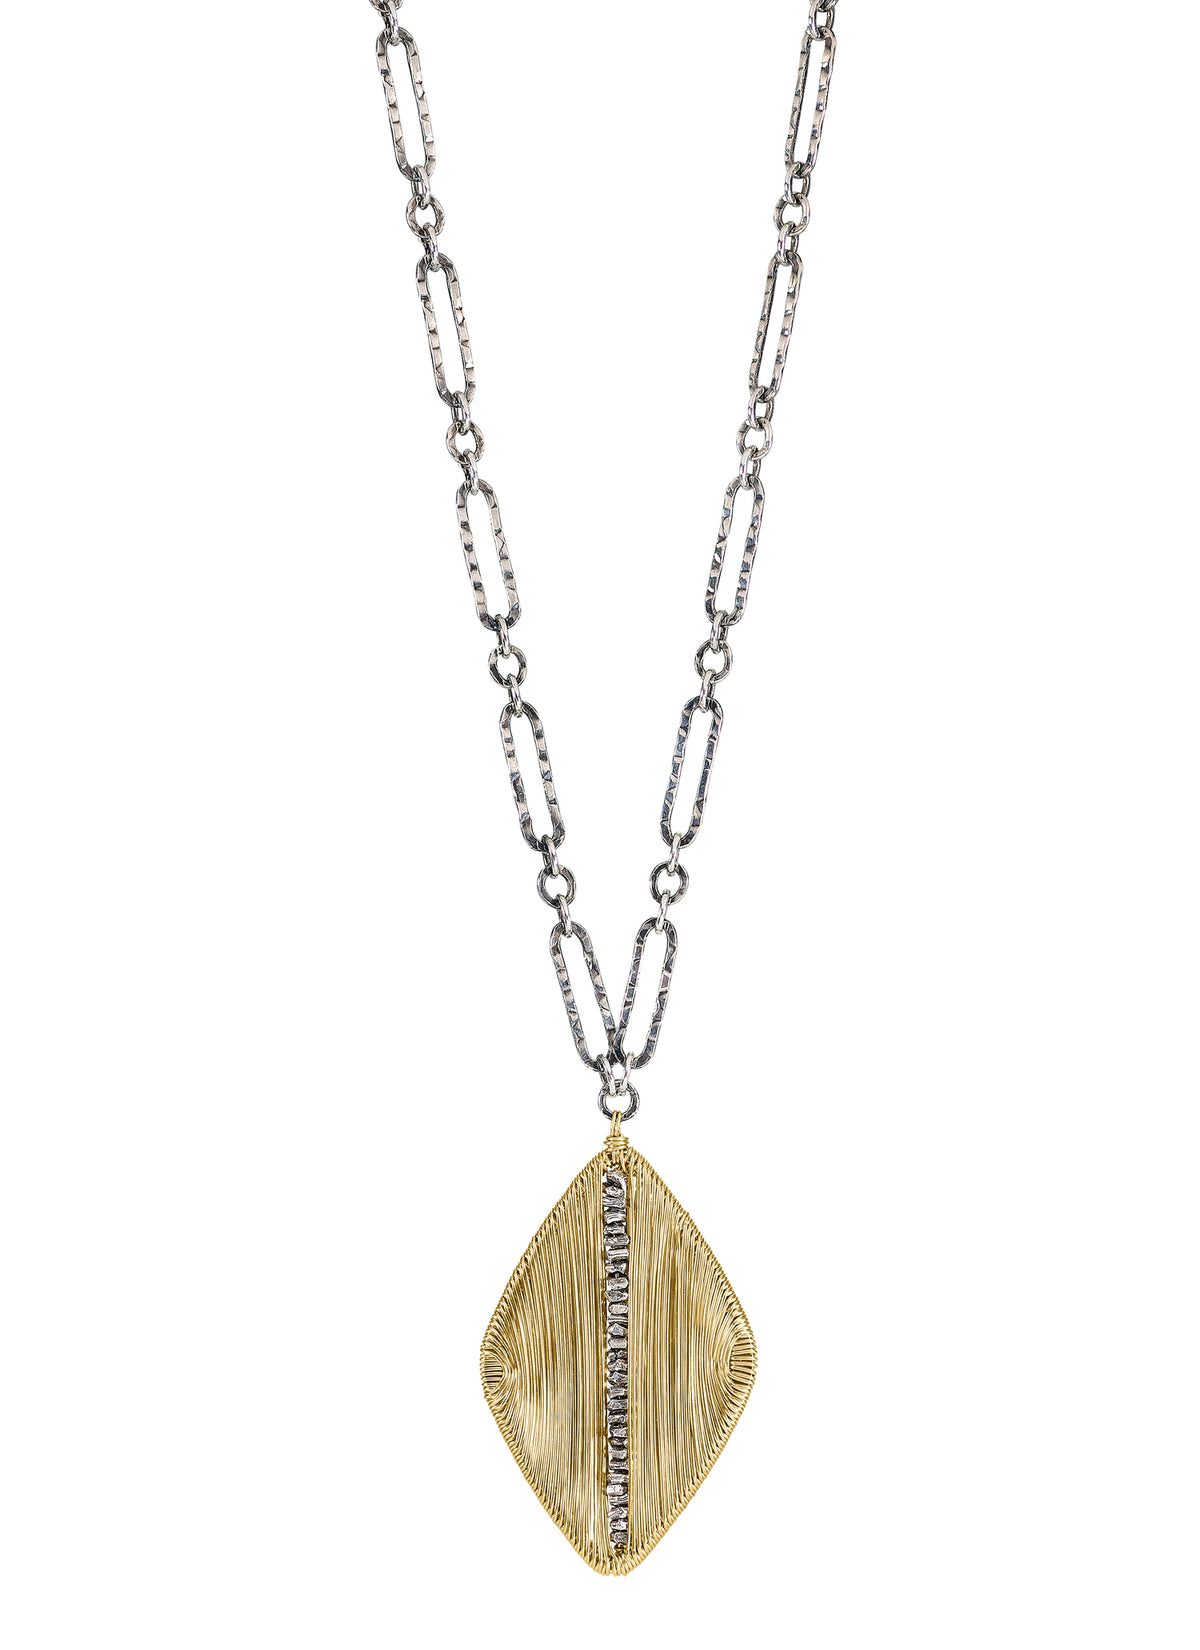 14k gold fill Sterling silver Mixed metal Necklace measures 18&quot; in length Pendant measures 1-1/4&quot; in length and 13/16&quot; in width Handmade in our Los Angeles studio